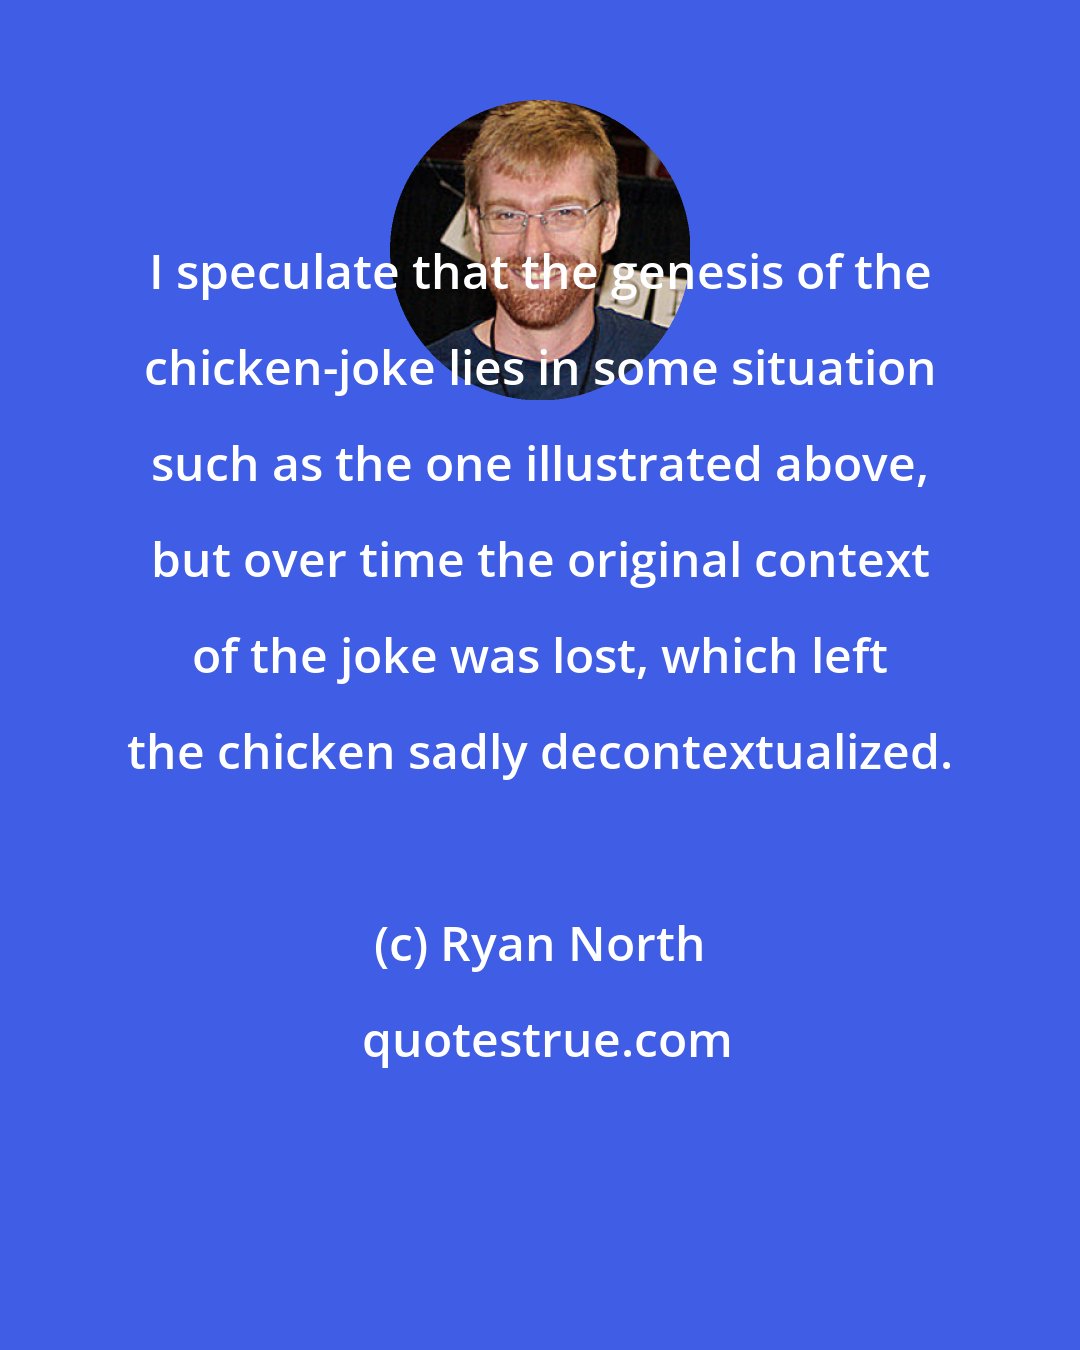 Ryan North: I speculate that the genesis of the chicken-joke lies in some situation such as the one illustrated above, but over time the original context of the joke was lost, which left the chicken sadly decontextualized.